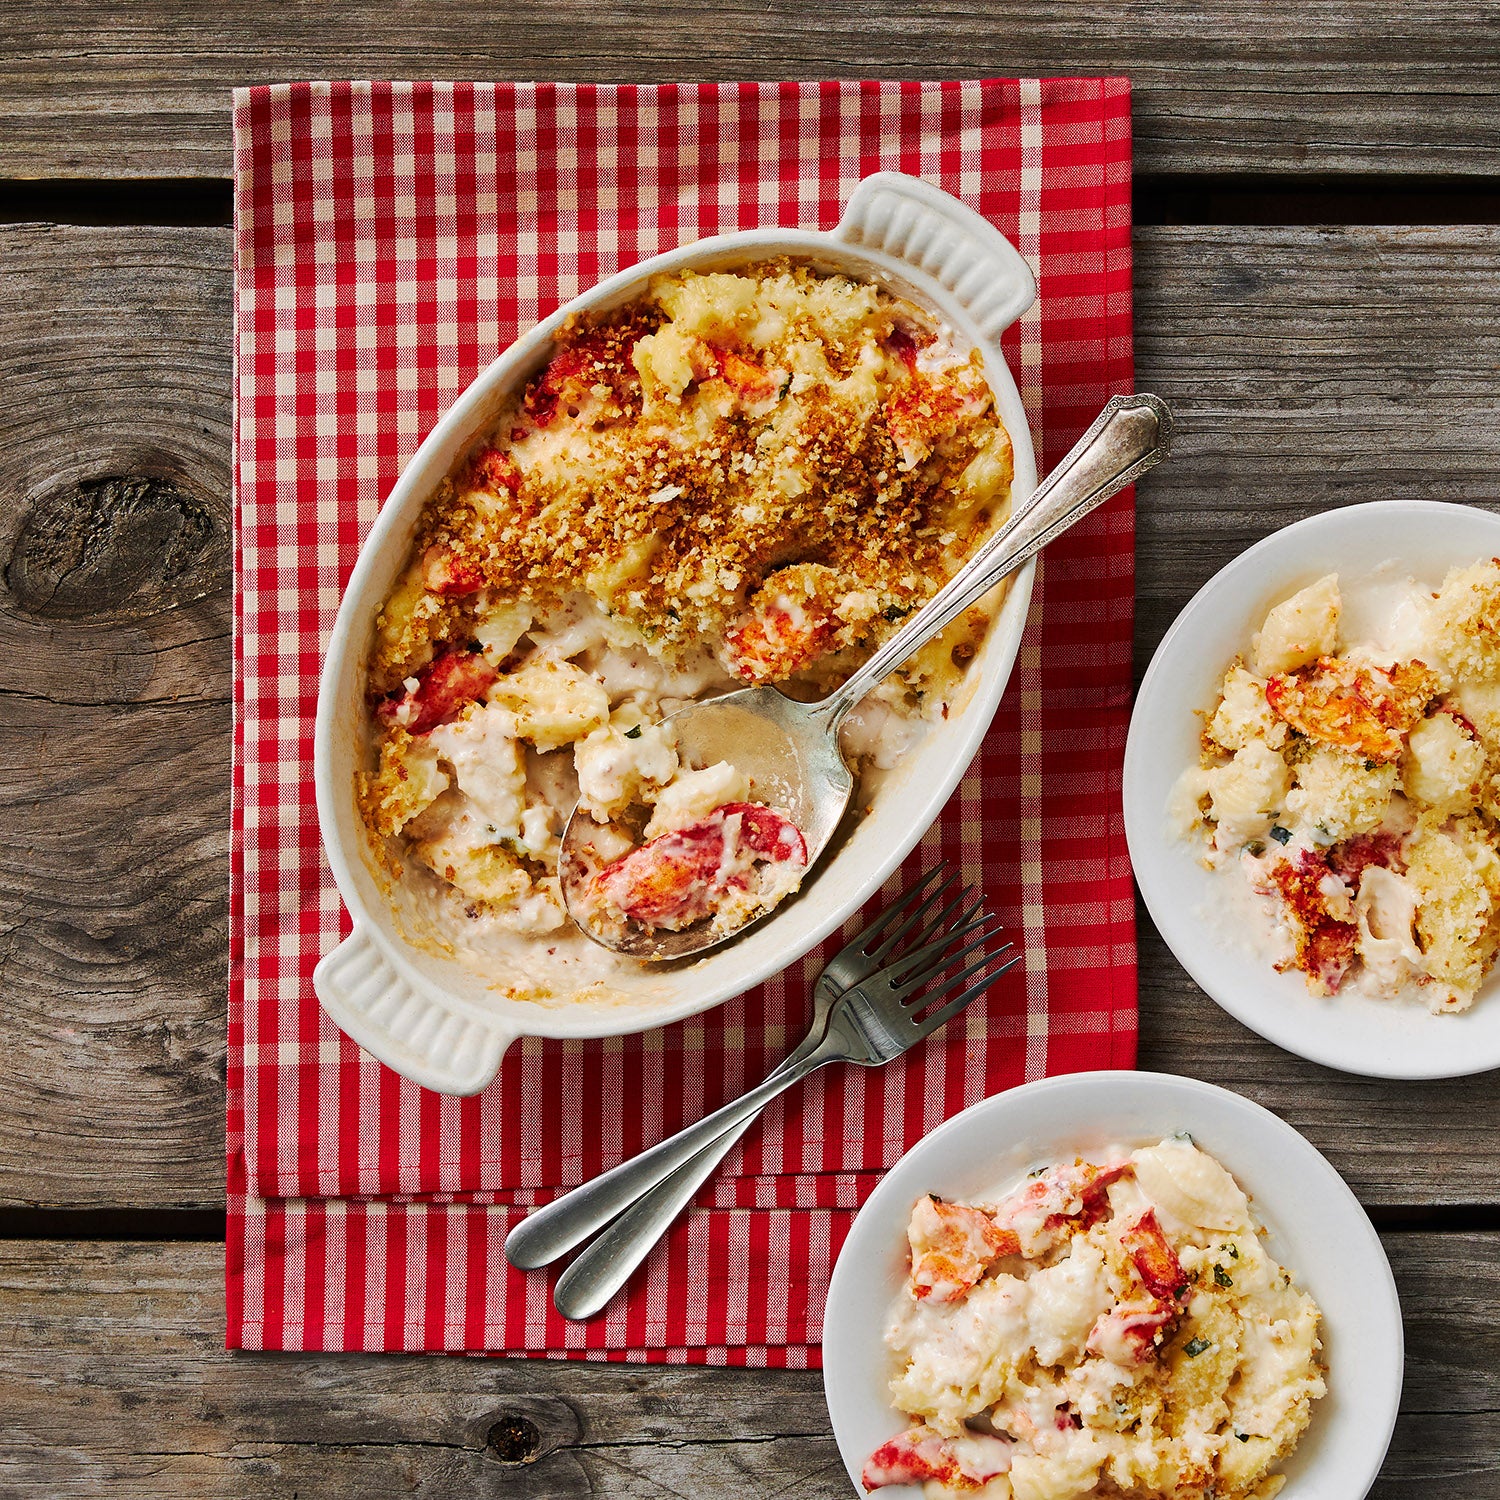 This photograph Maine Lobster Mac and cheese fresh out of the oven topped with beautifully browned bread crumbs and beside the baking dish there are two dishes with mouthwatering servings of mac and cheese ready to be devoured